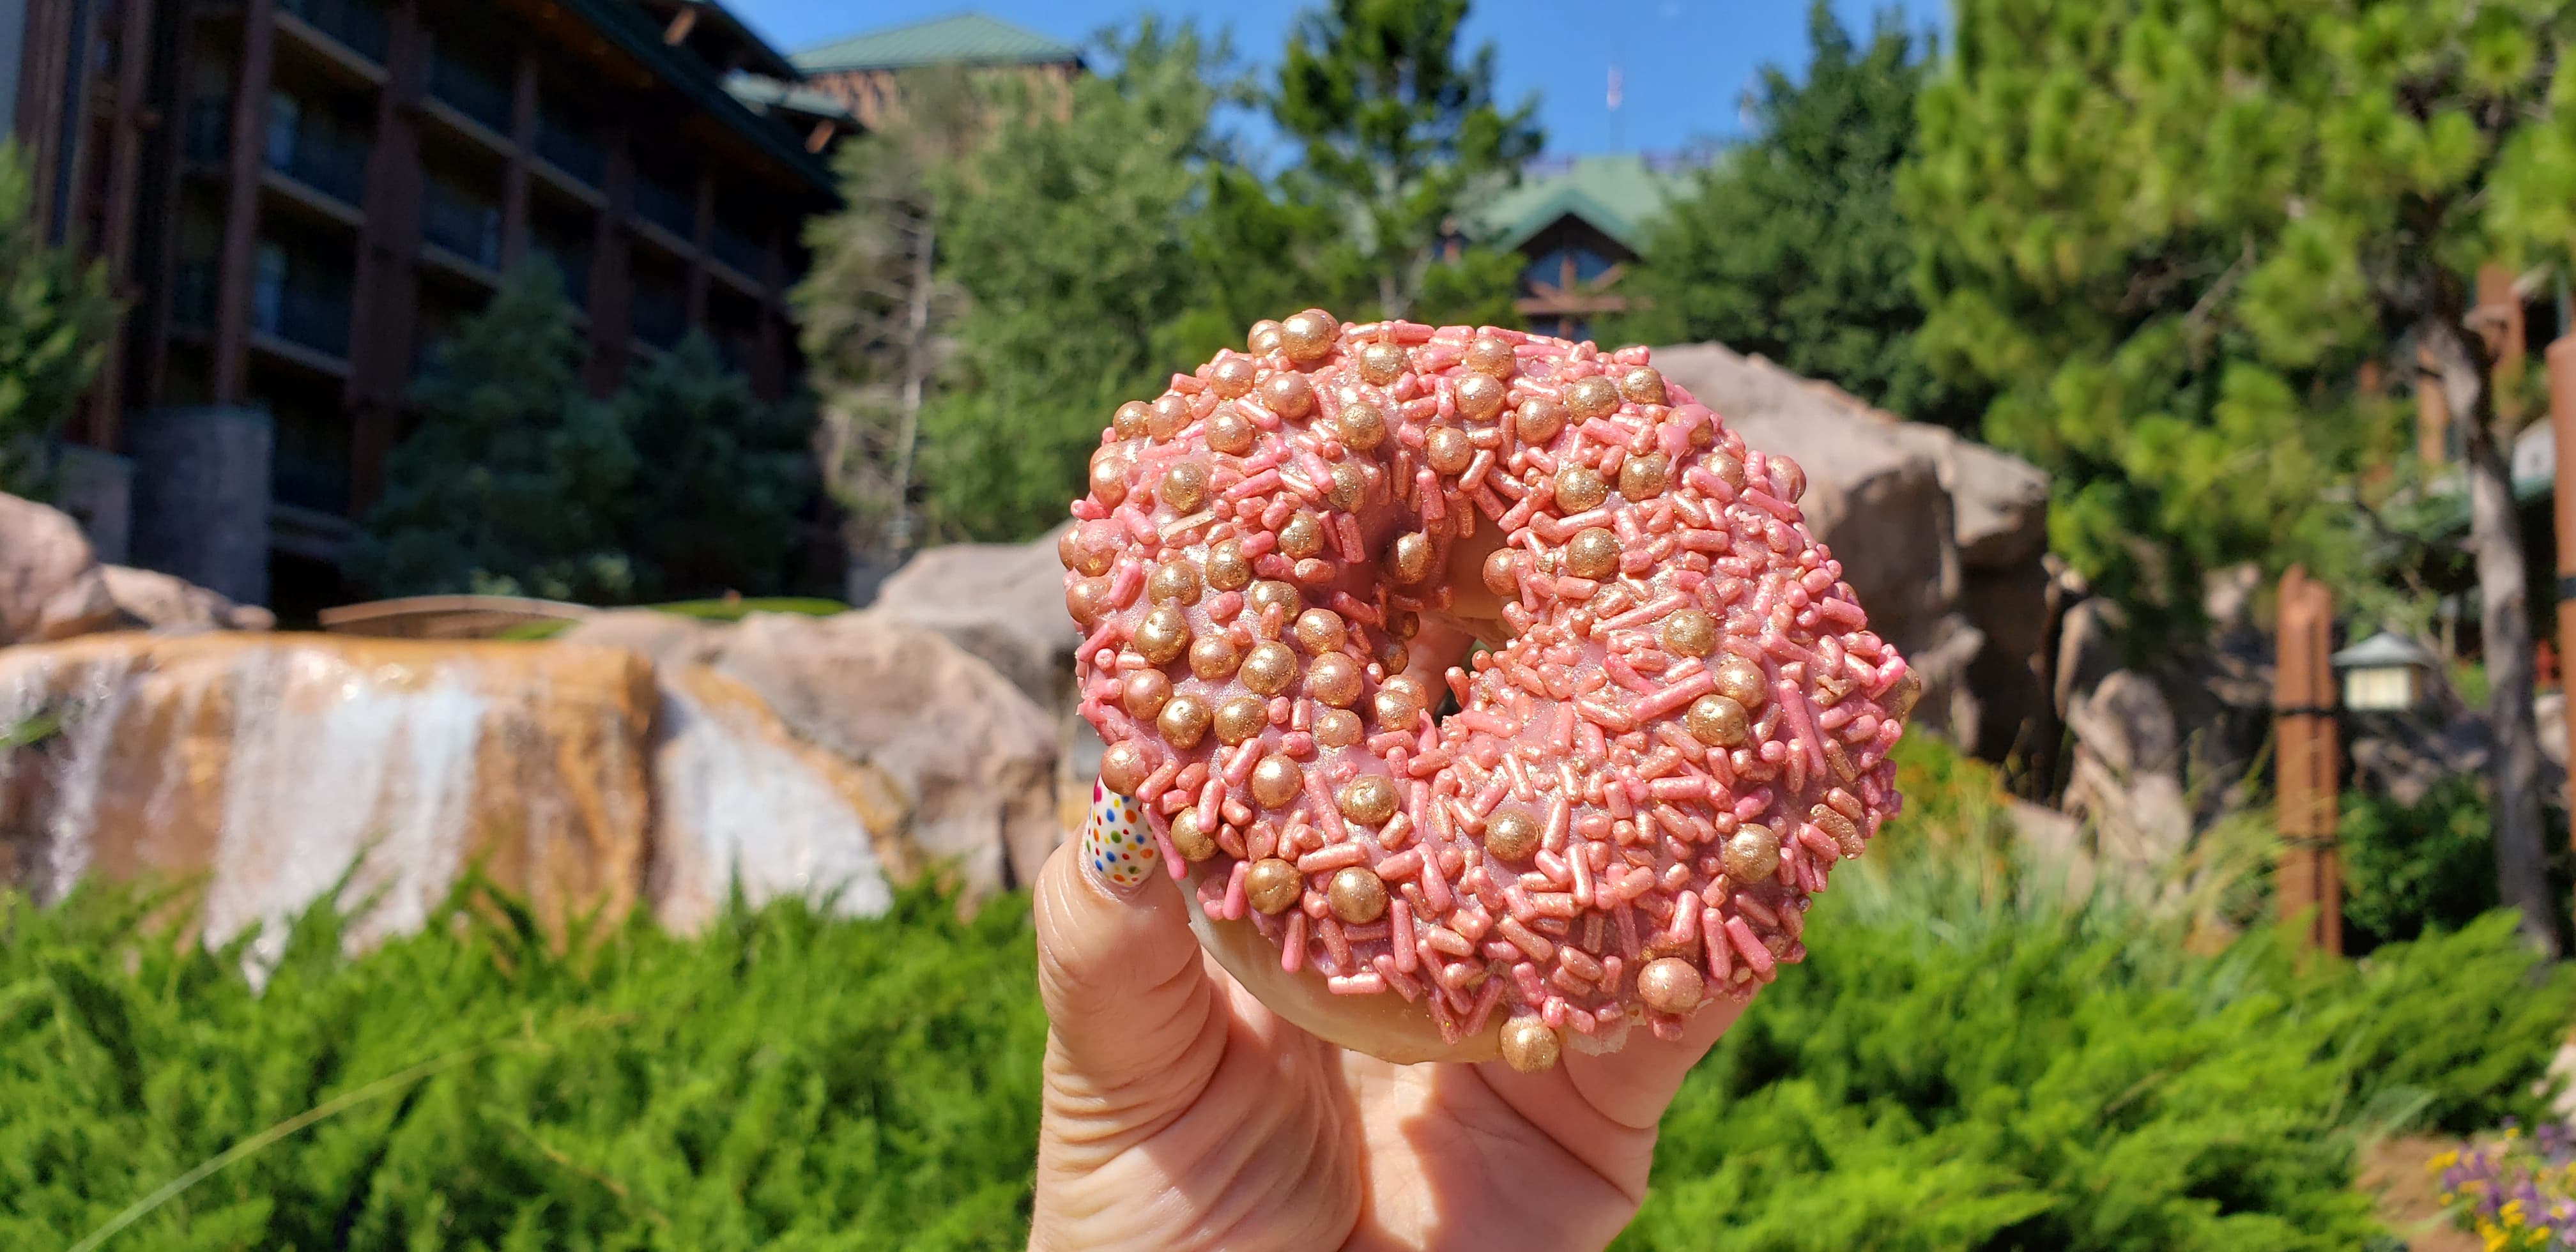 The Briar Rose Doughnut Has Been Spotted at Walt Disney World